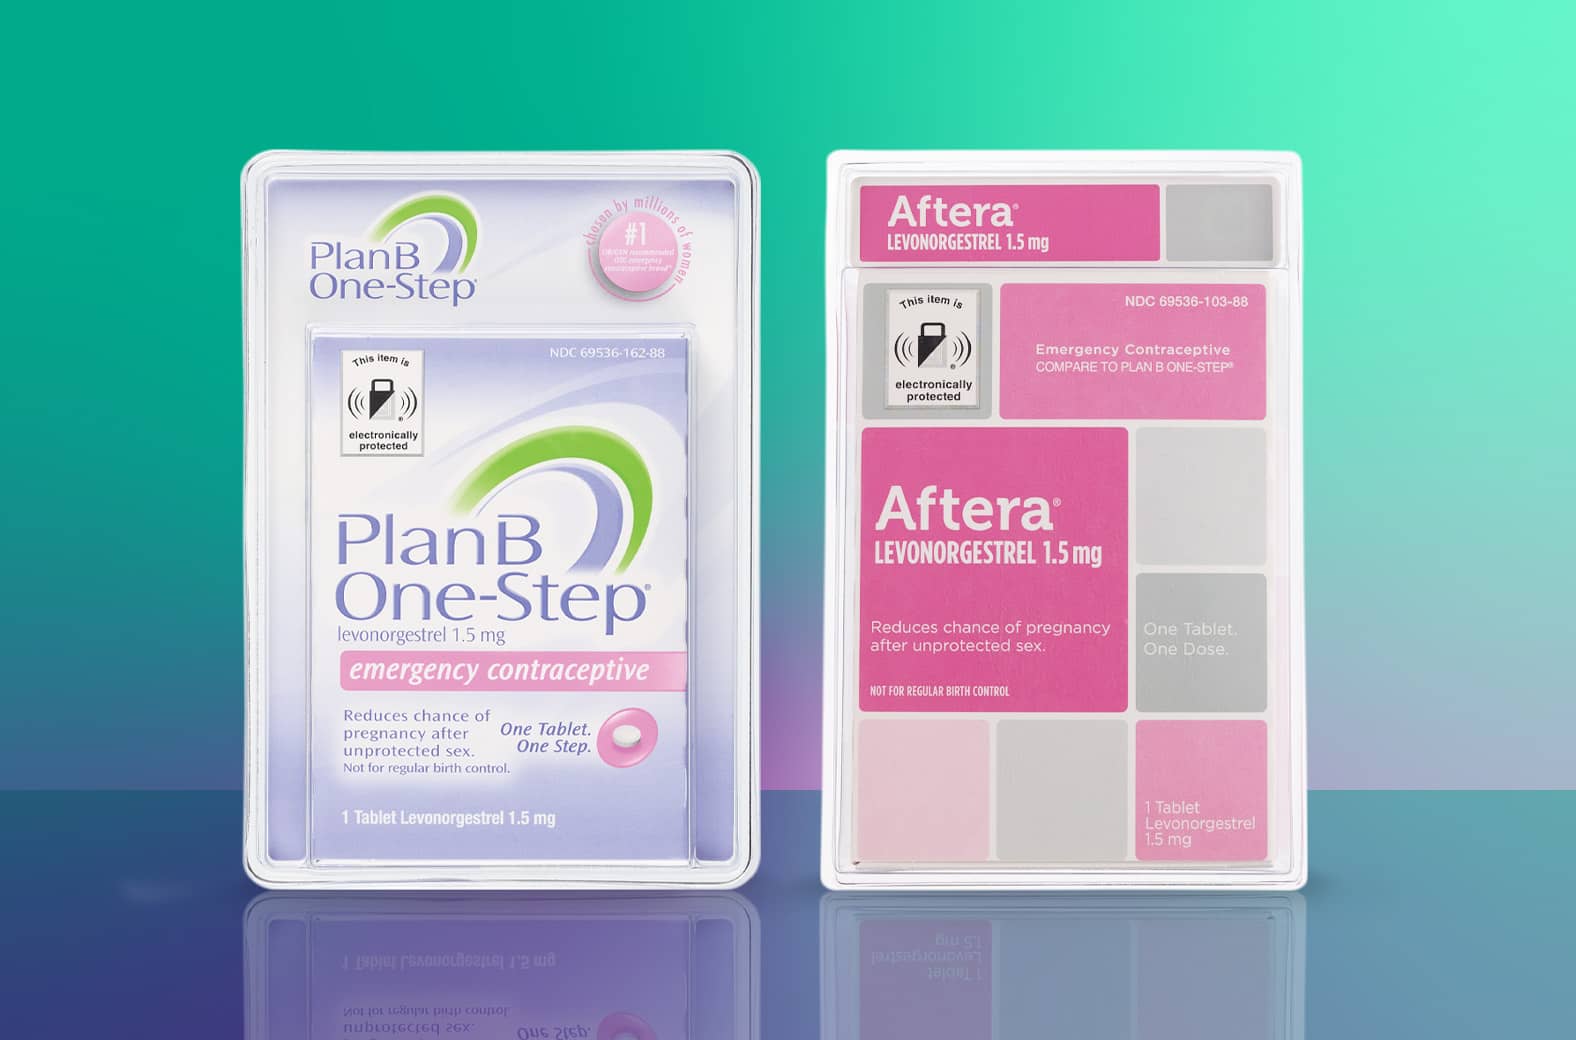 Plan B and Aftera contraceptive products